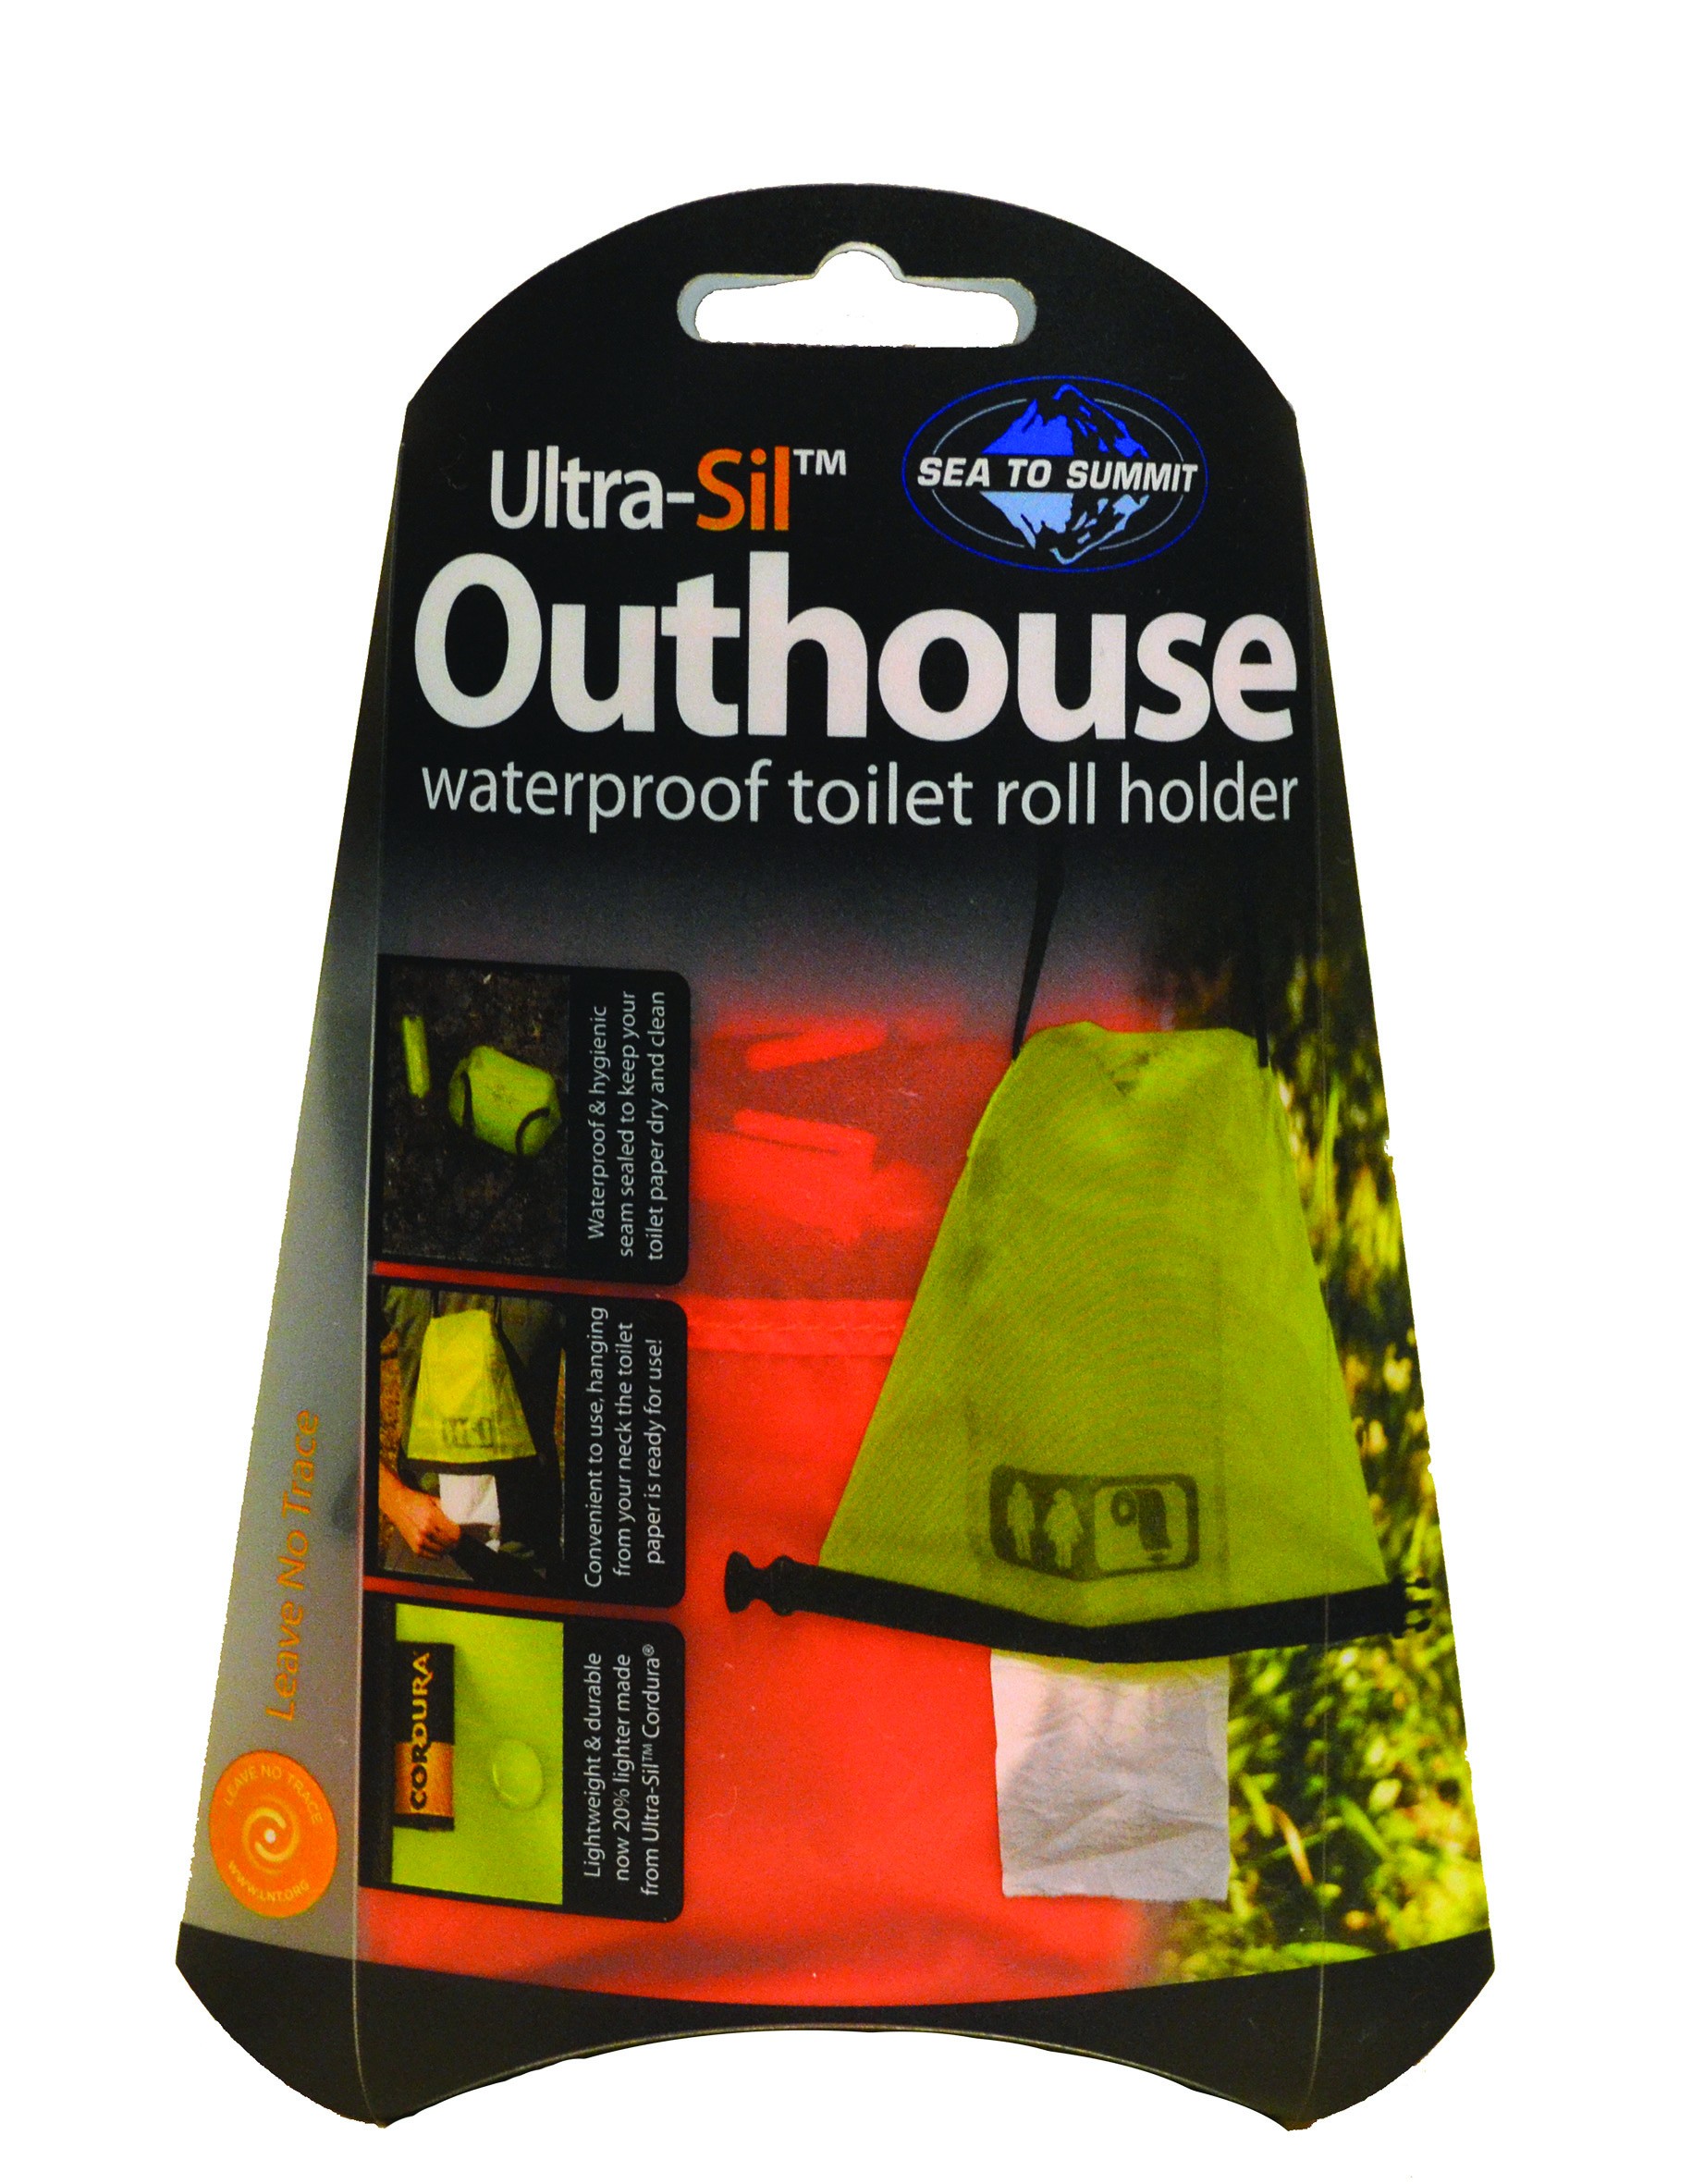 Ultra-Sil Outhouse